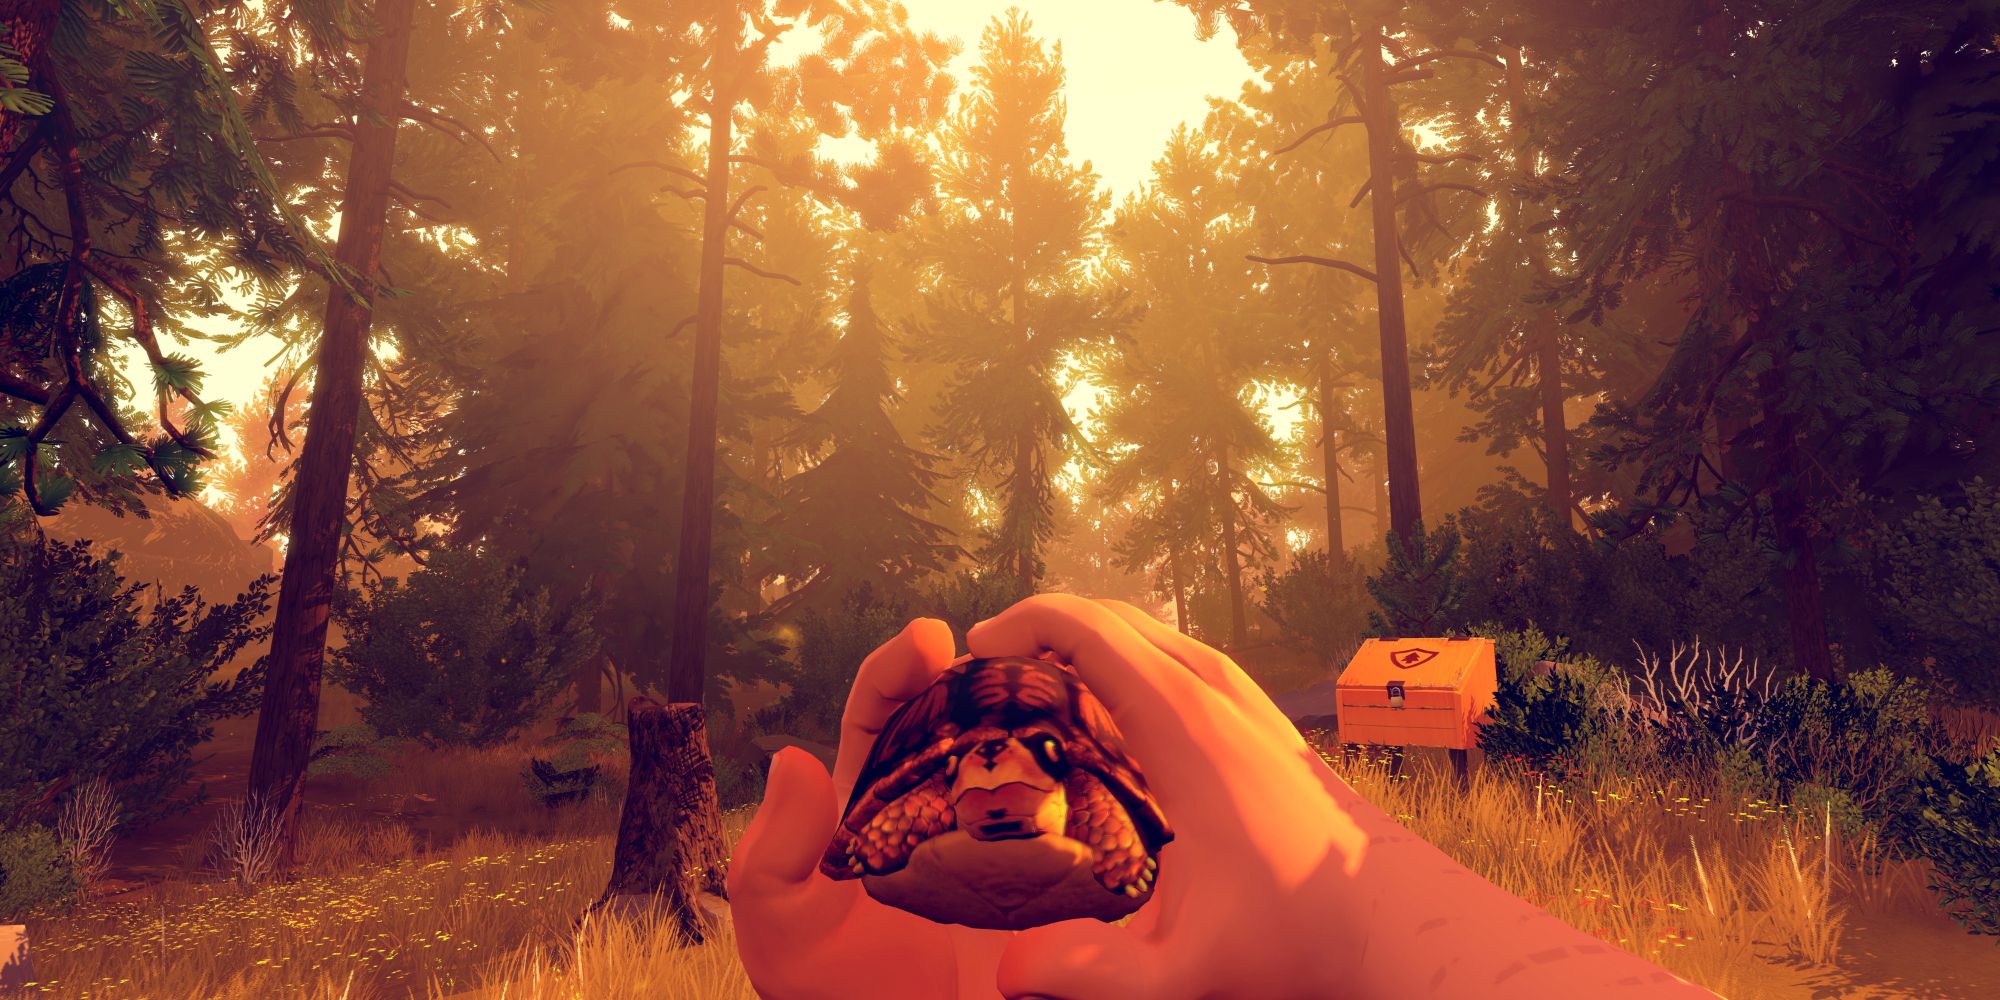 a screenshot of gameplay from Firewatch. It shows a world during golden hour.